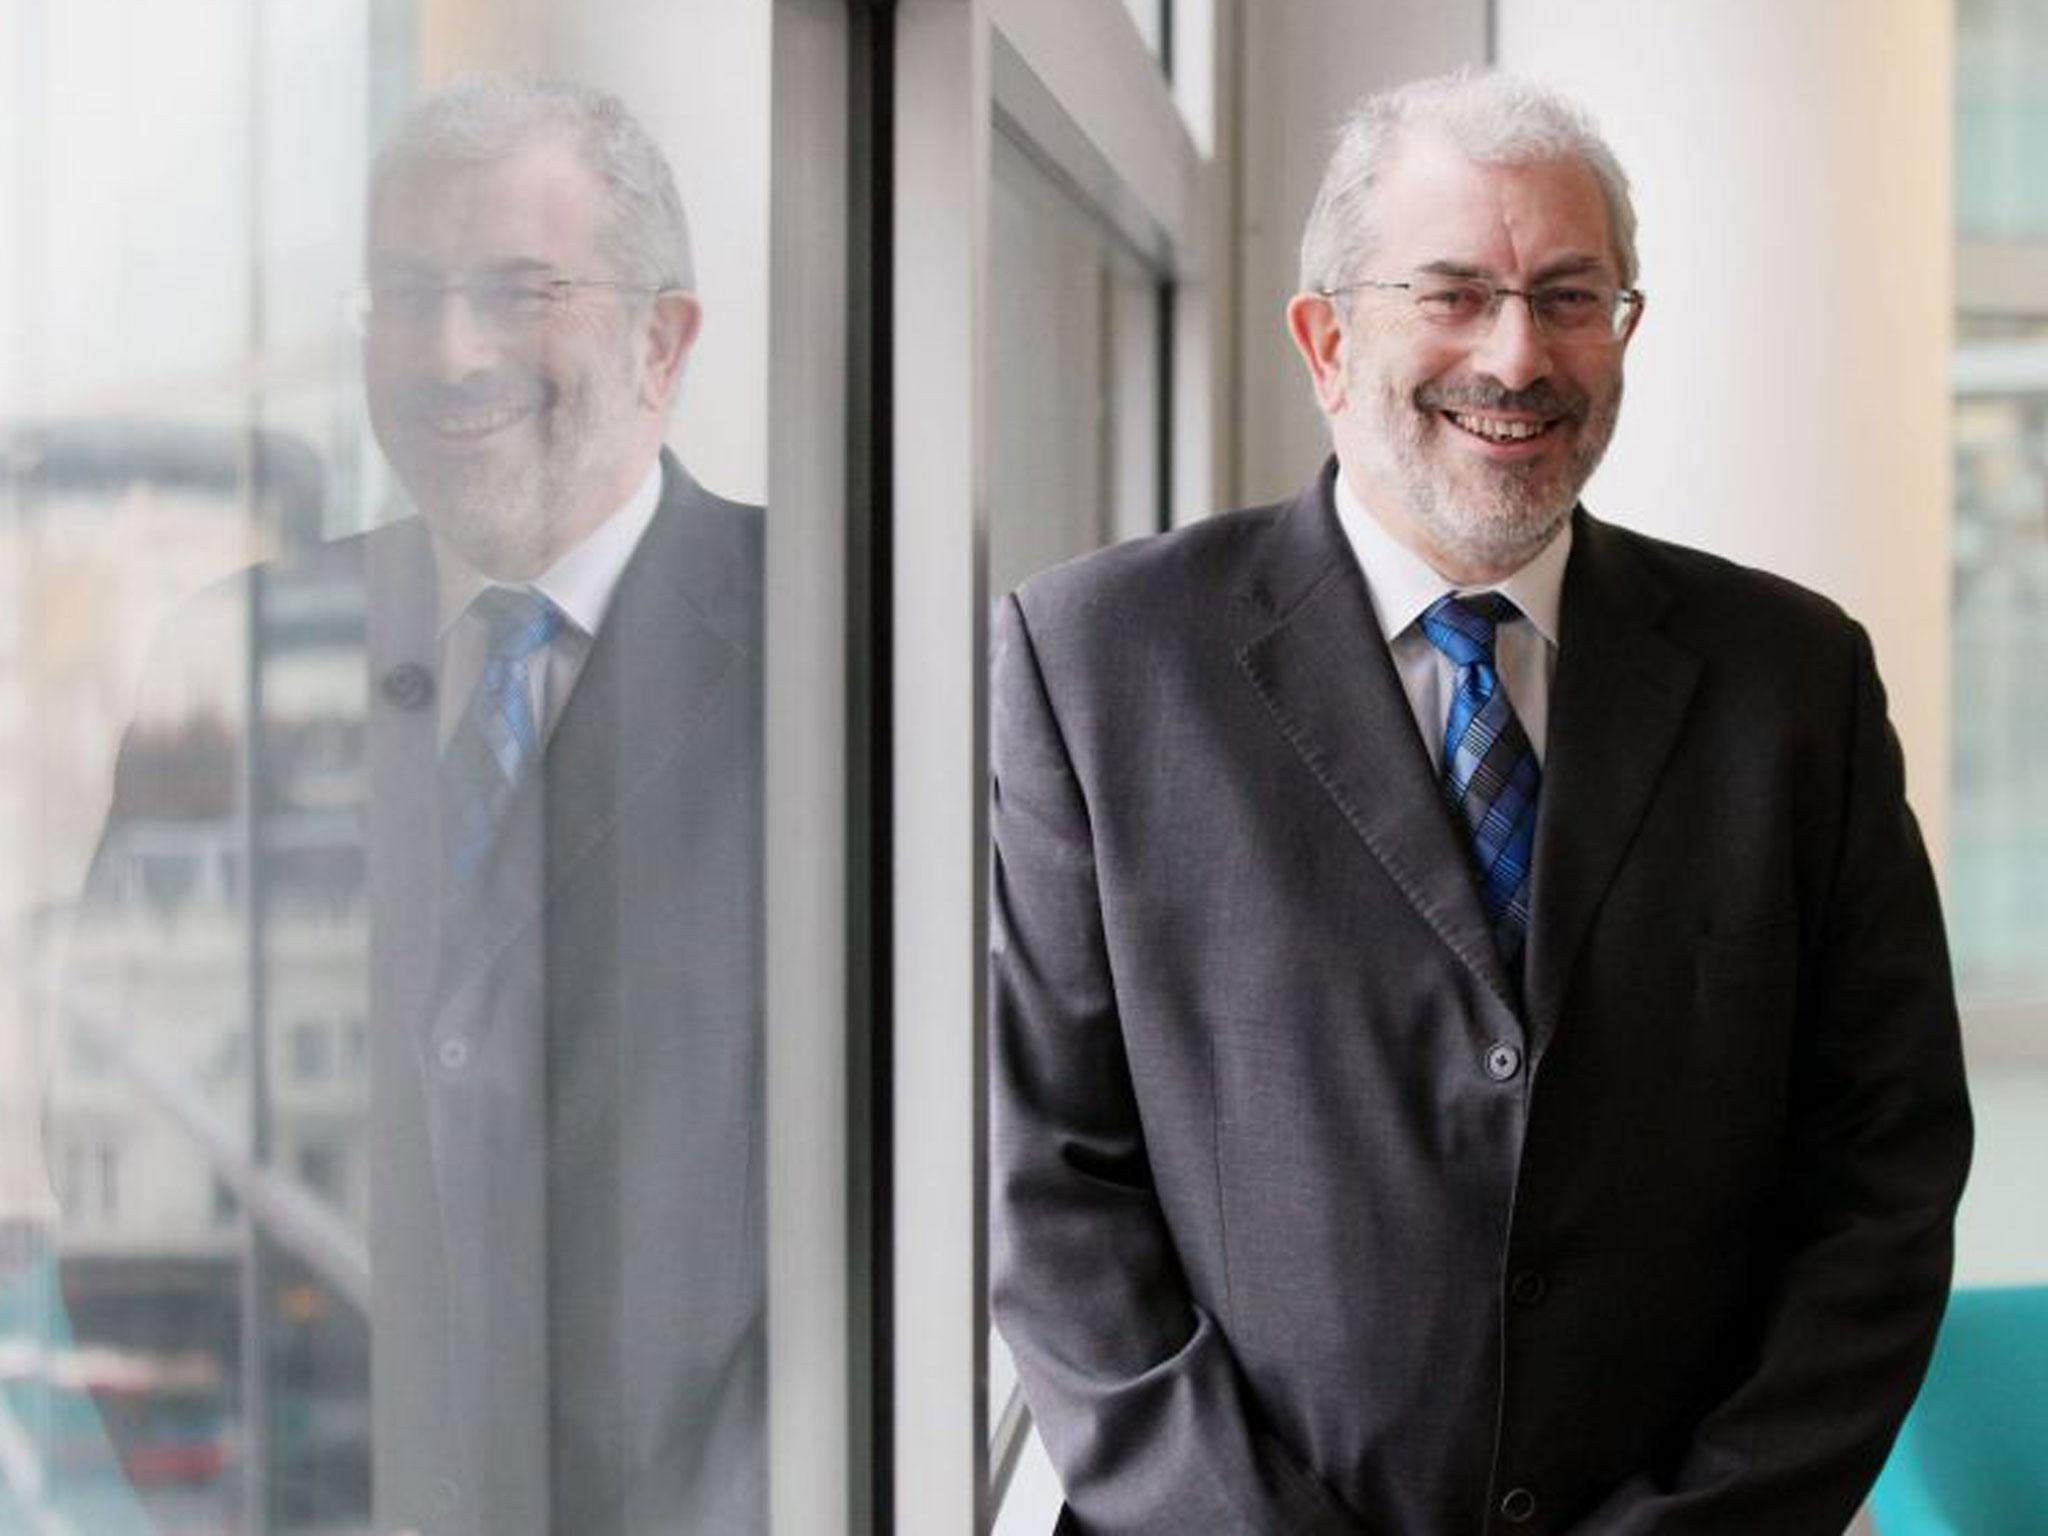 Sir Bob Kerslake will be replaced as Head of the Civil Service – but not yet